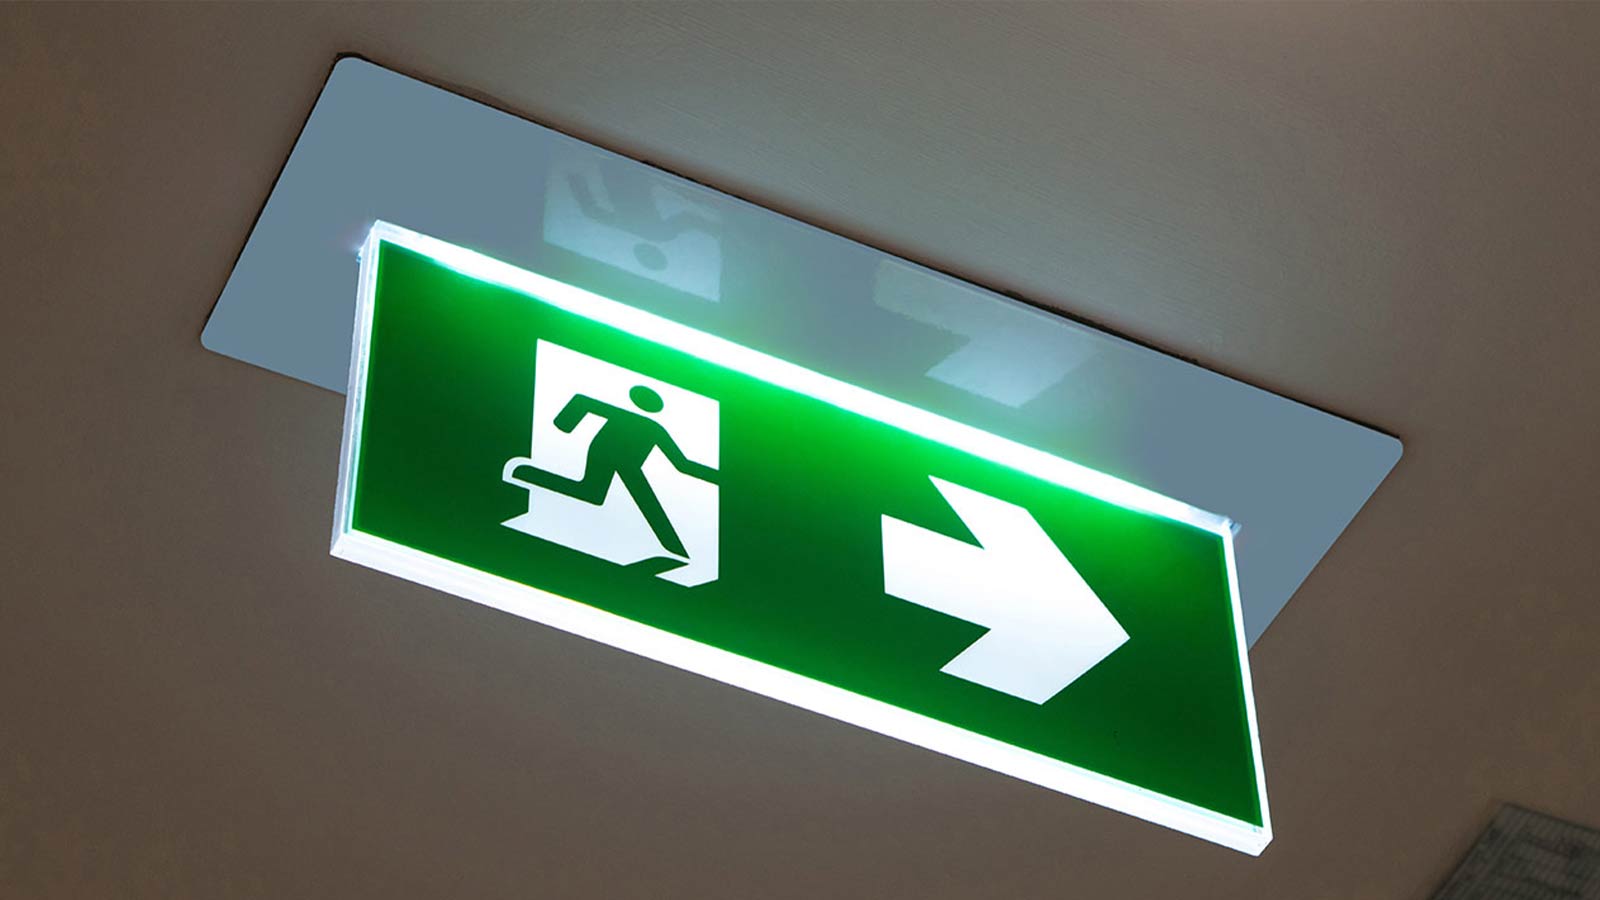 green and white illuminated exit sign